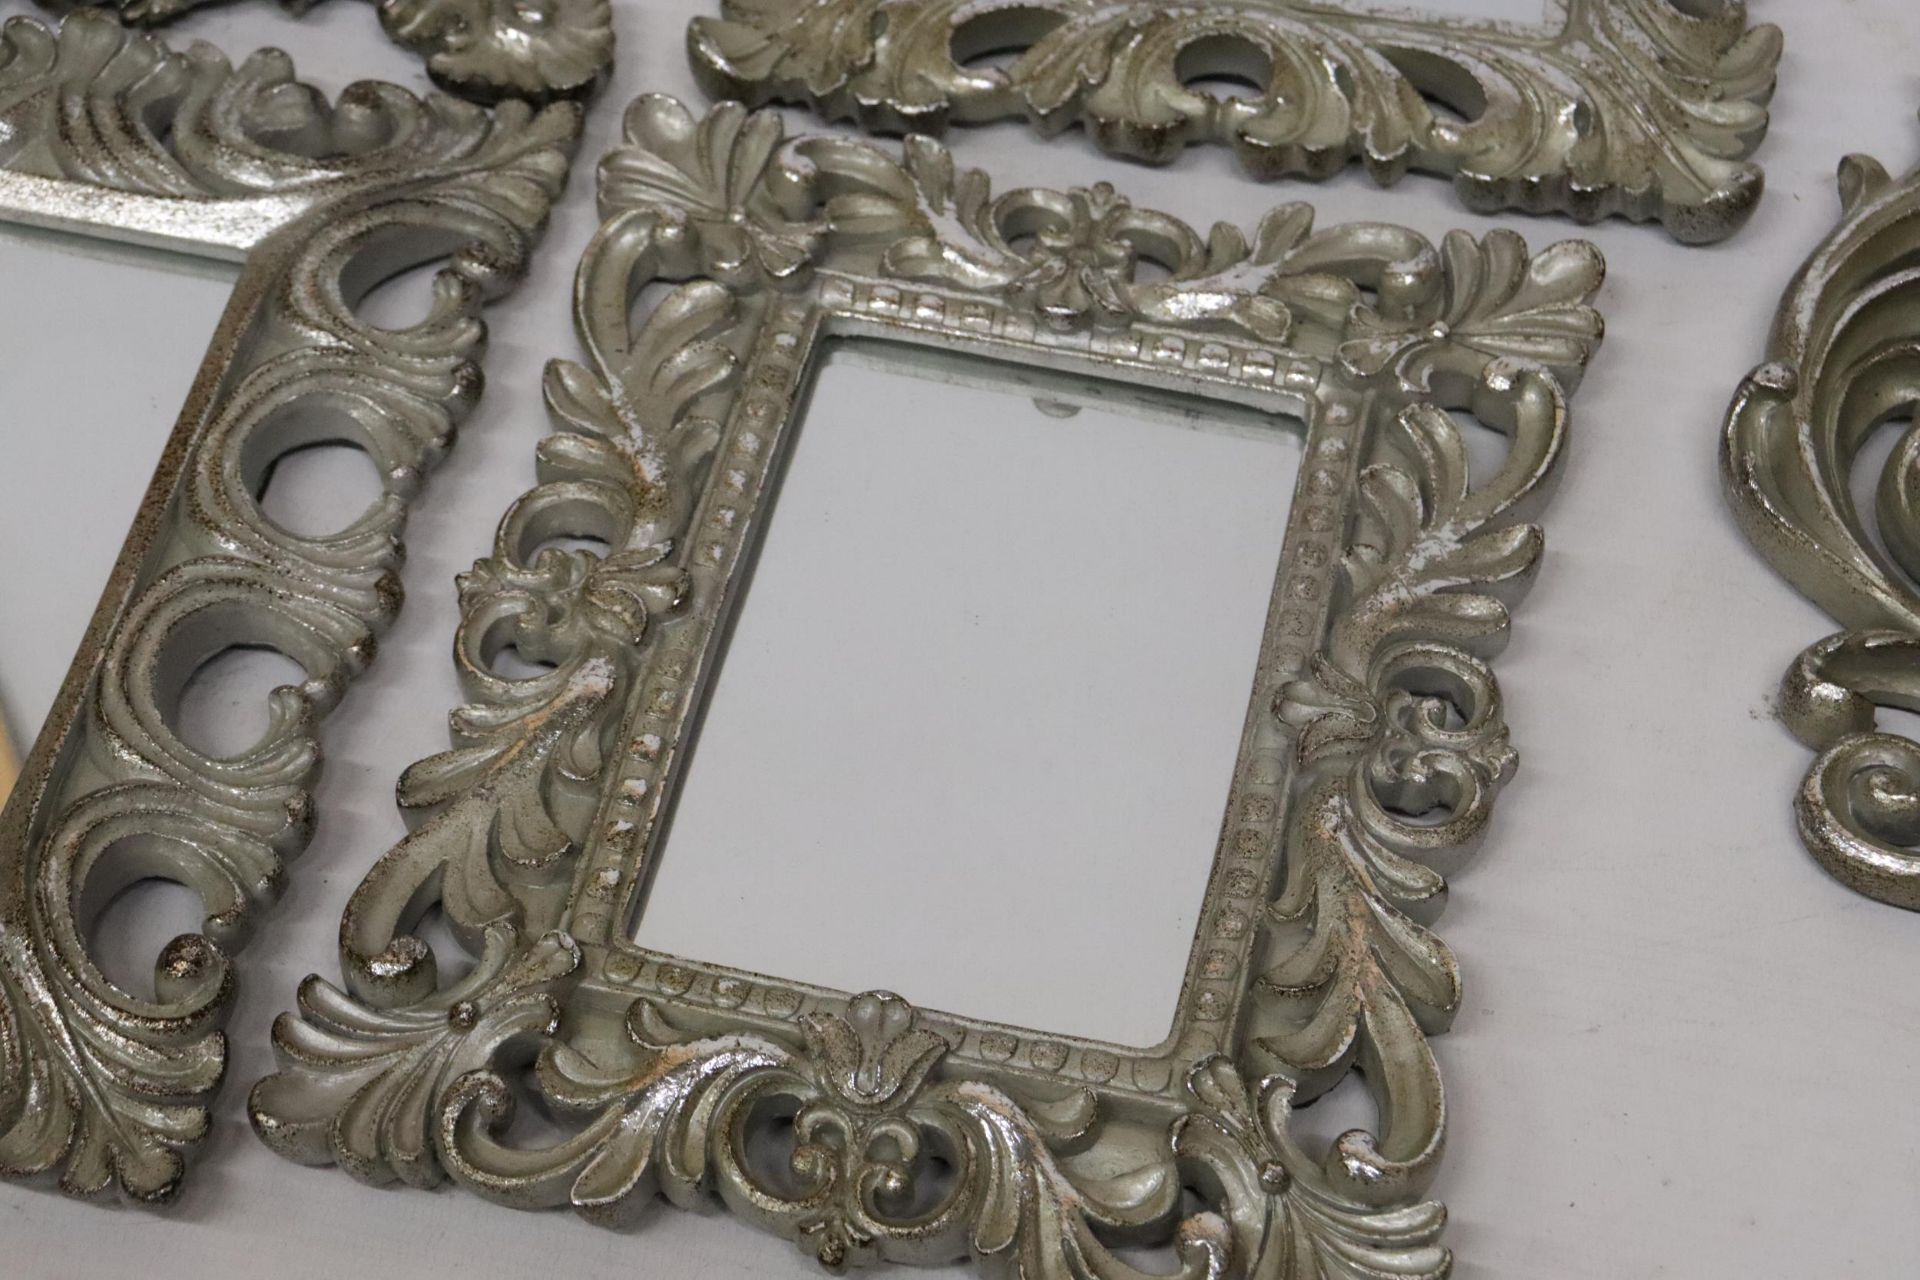 FIVE SMALL MIRRORS WITH ORNATE SILVER COLOURED FRAMES - Image 8 of 9